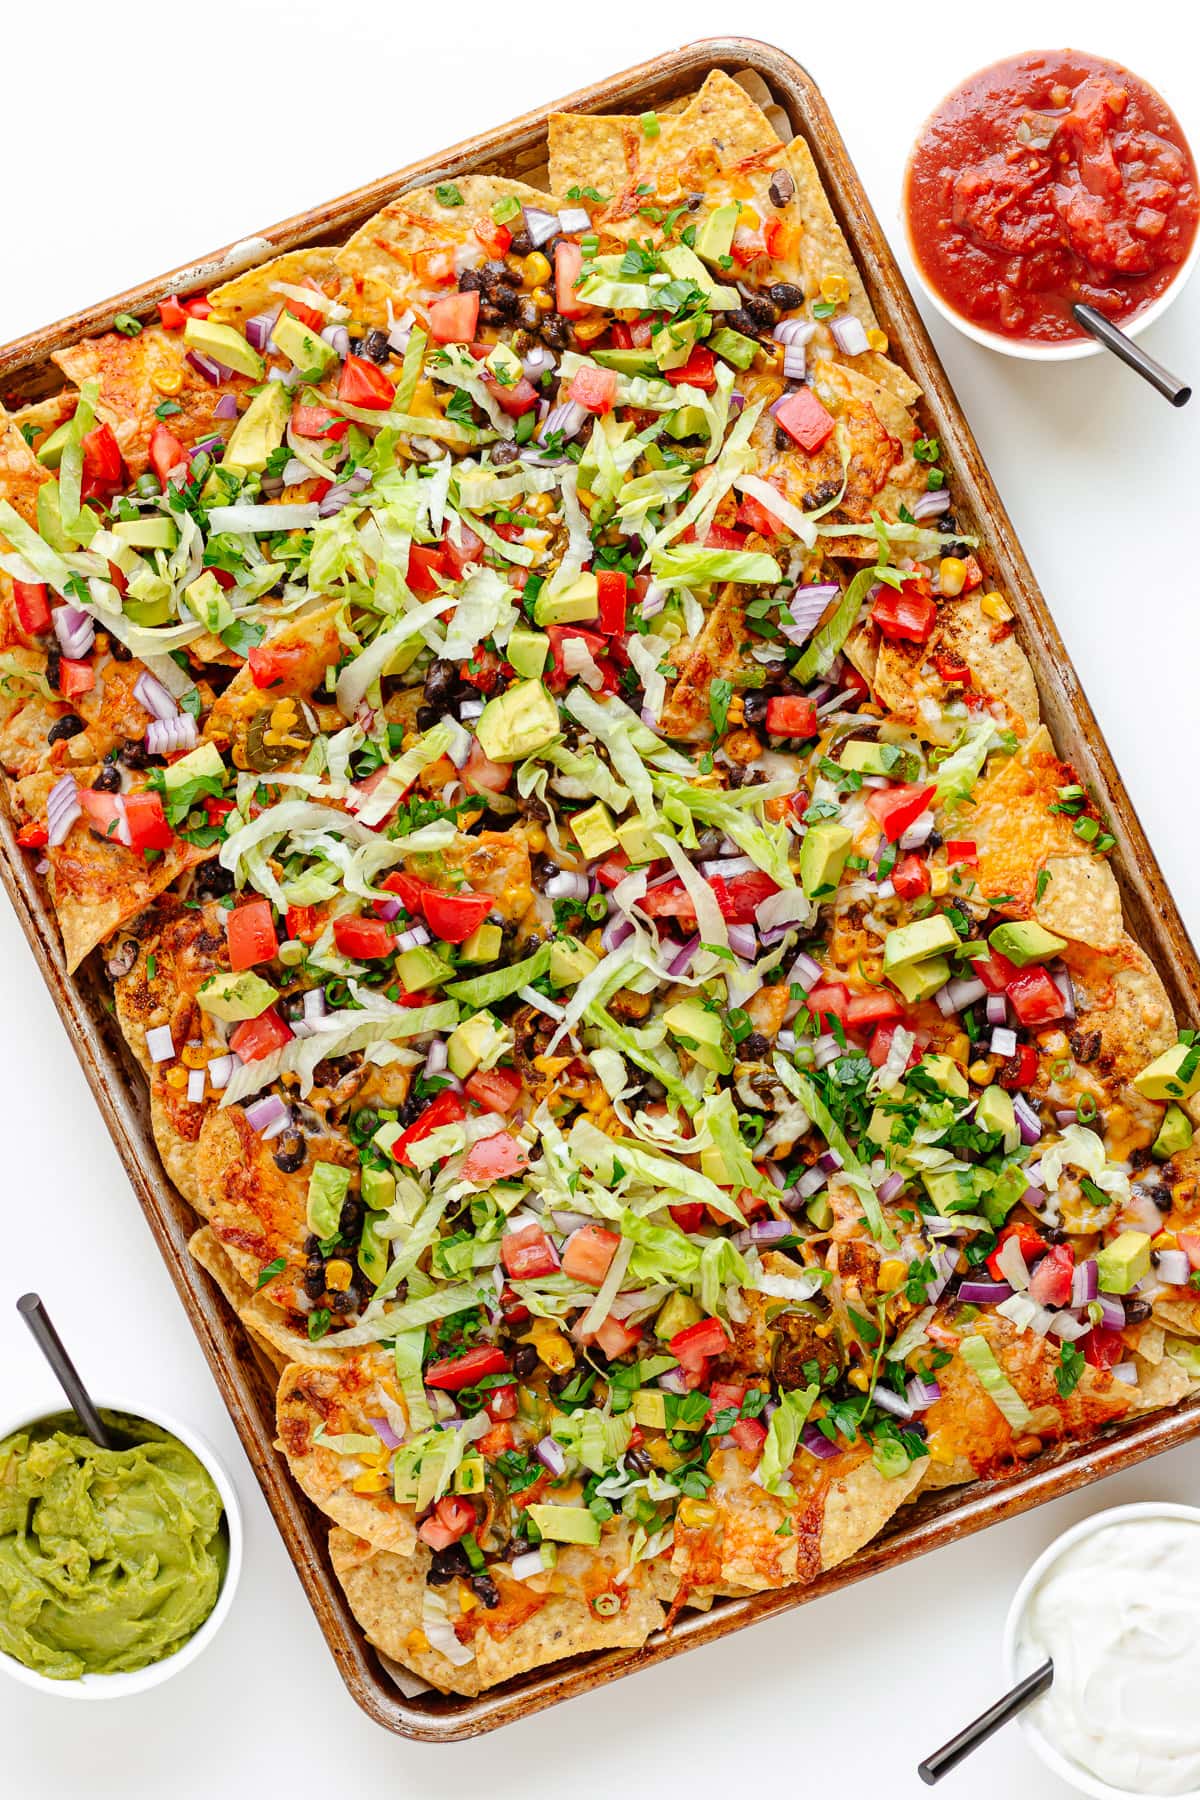 Vegetarian sheet pan nachos with small bowls of salsa, guacamole and sour cream beside it.